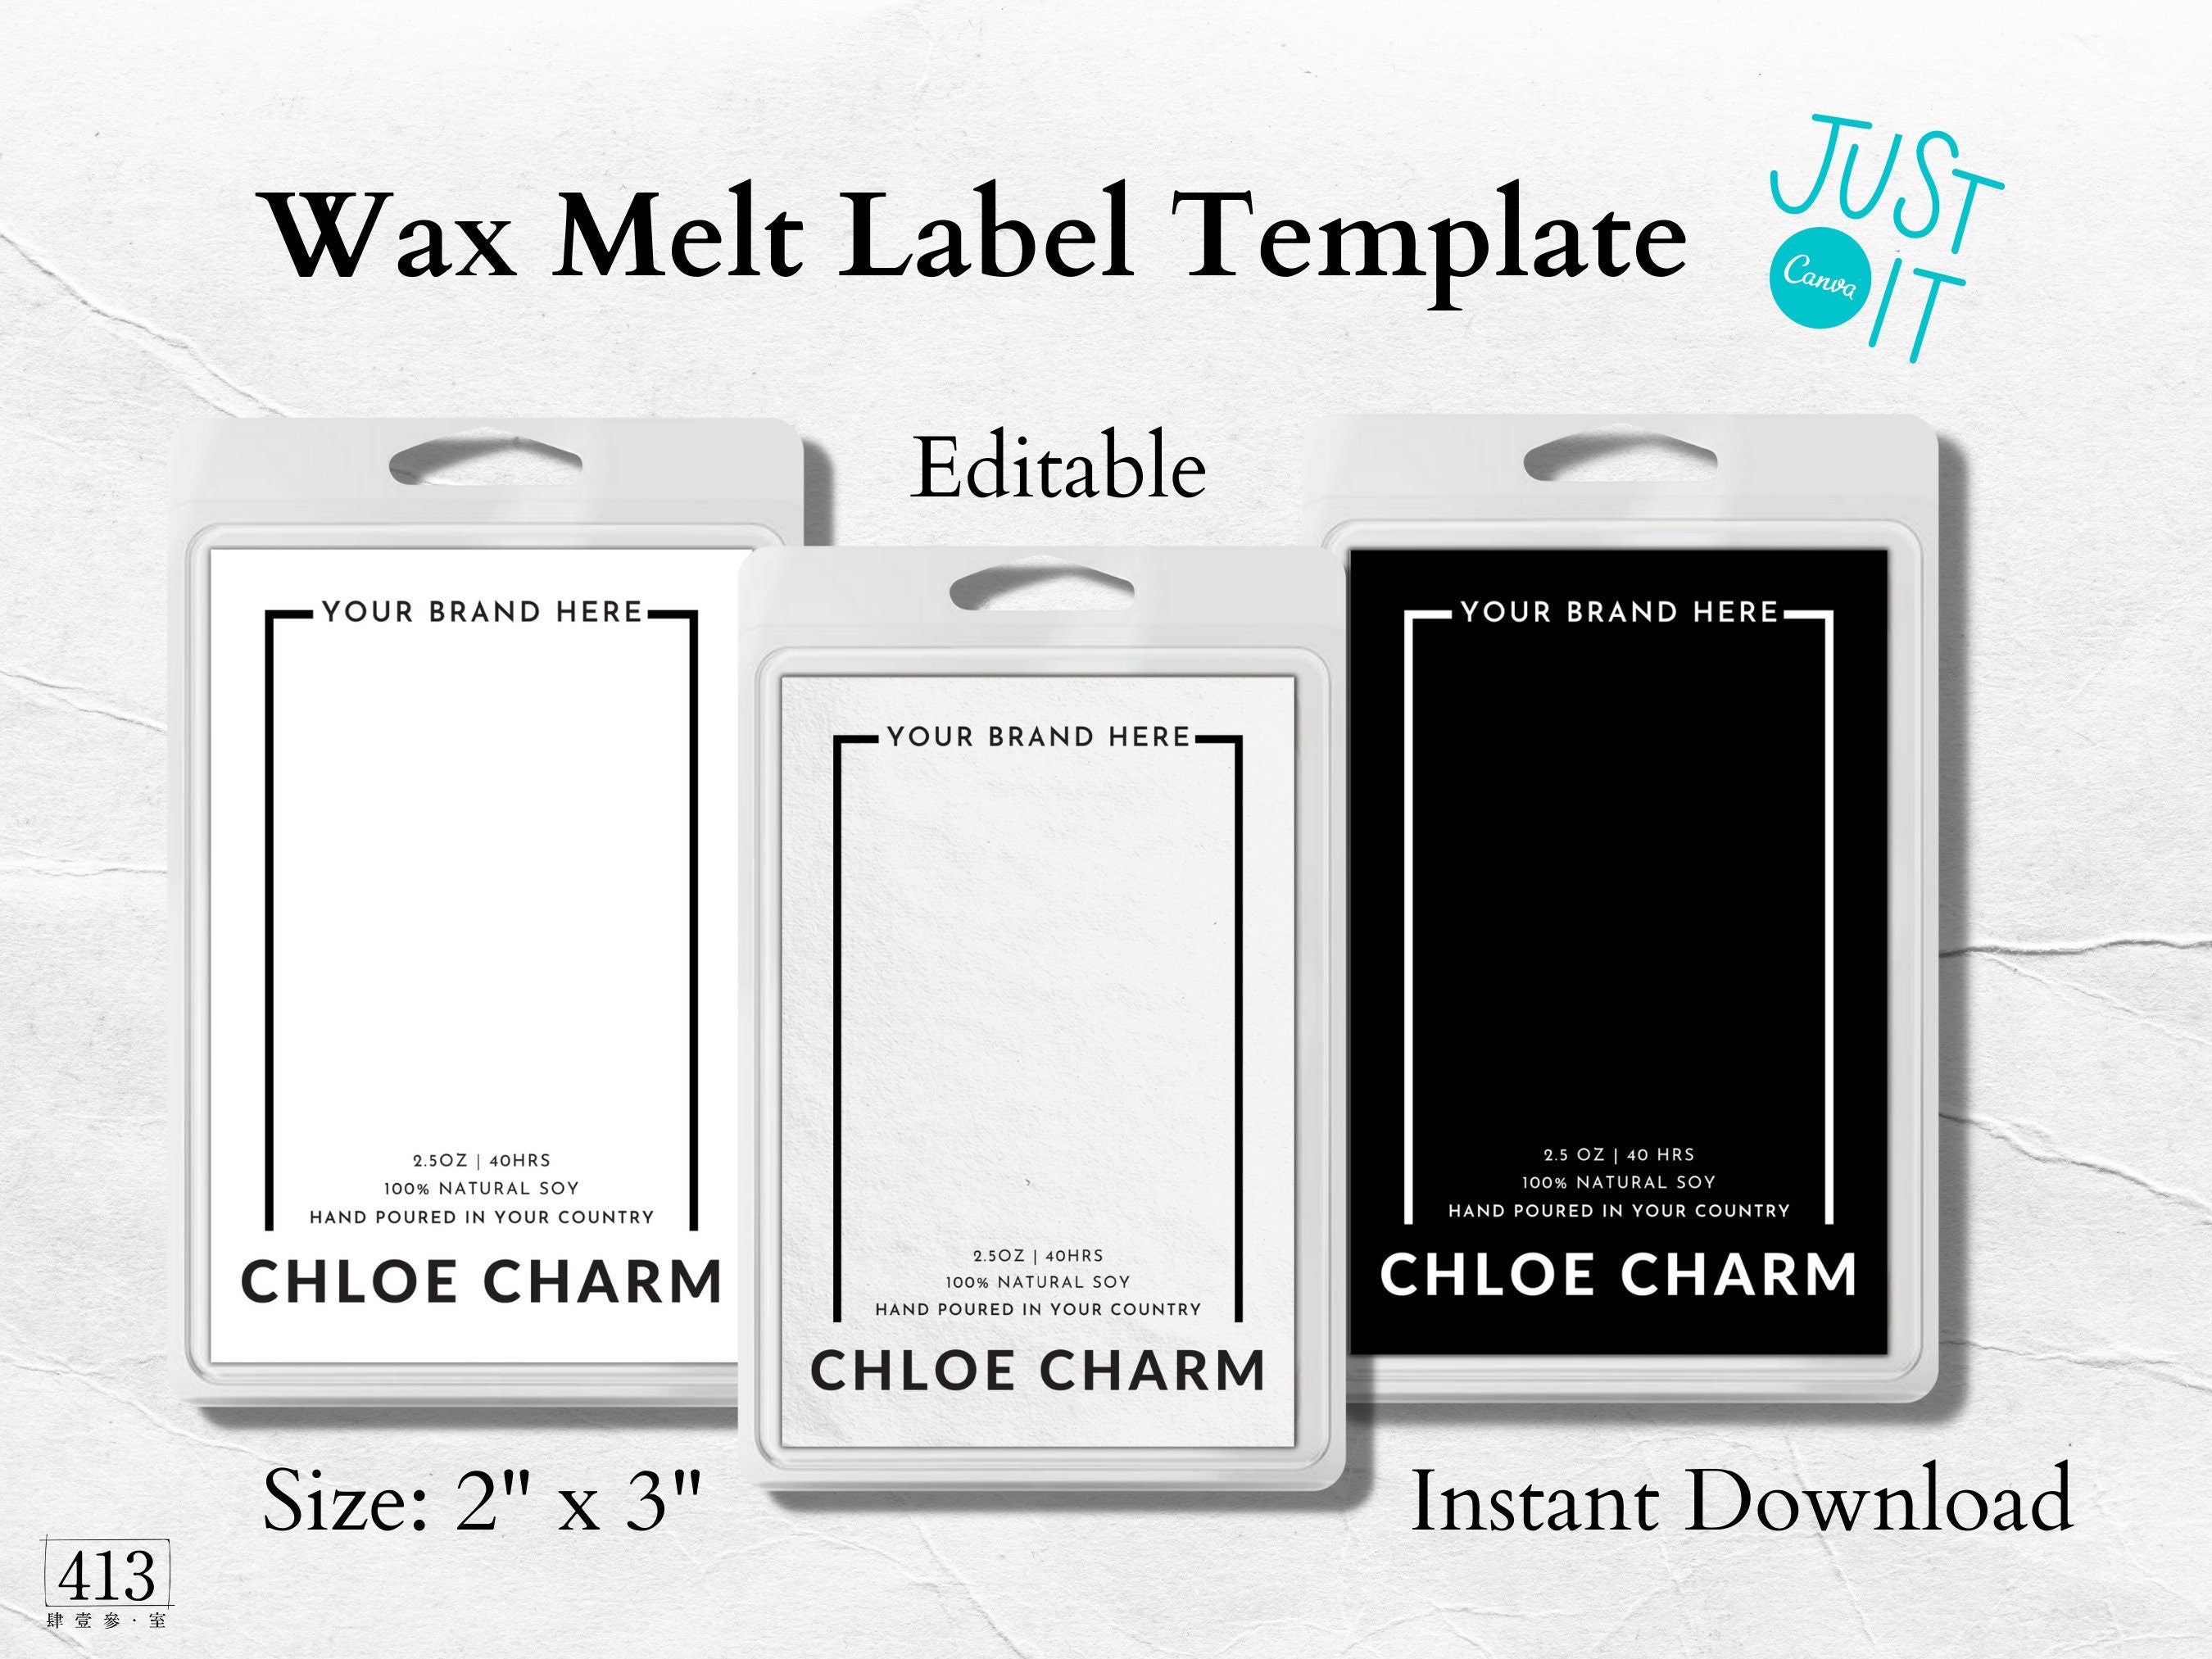 Candle & Wax Melt Warning Label Template Editable Candle 